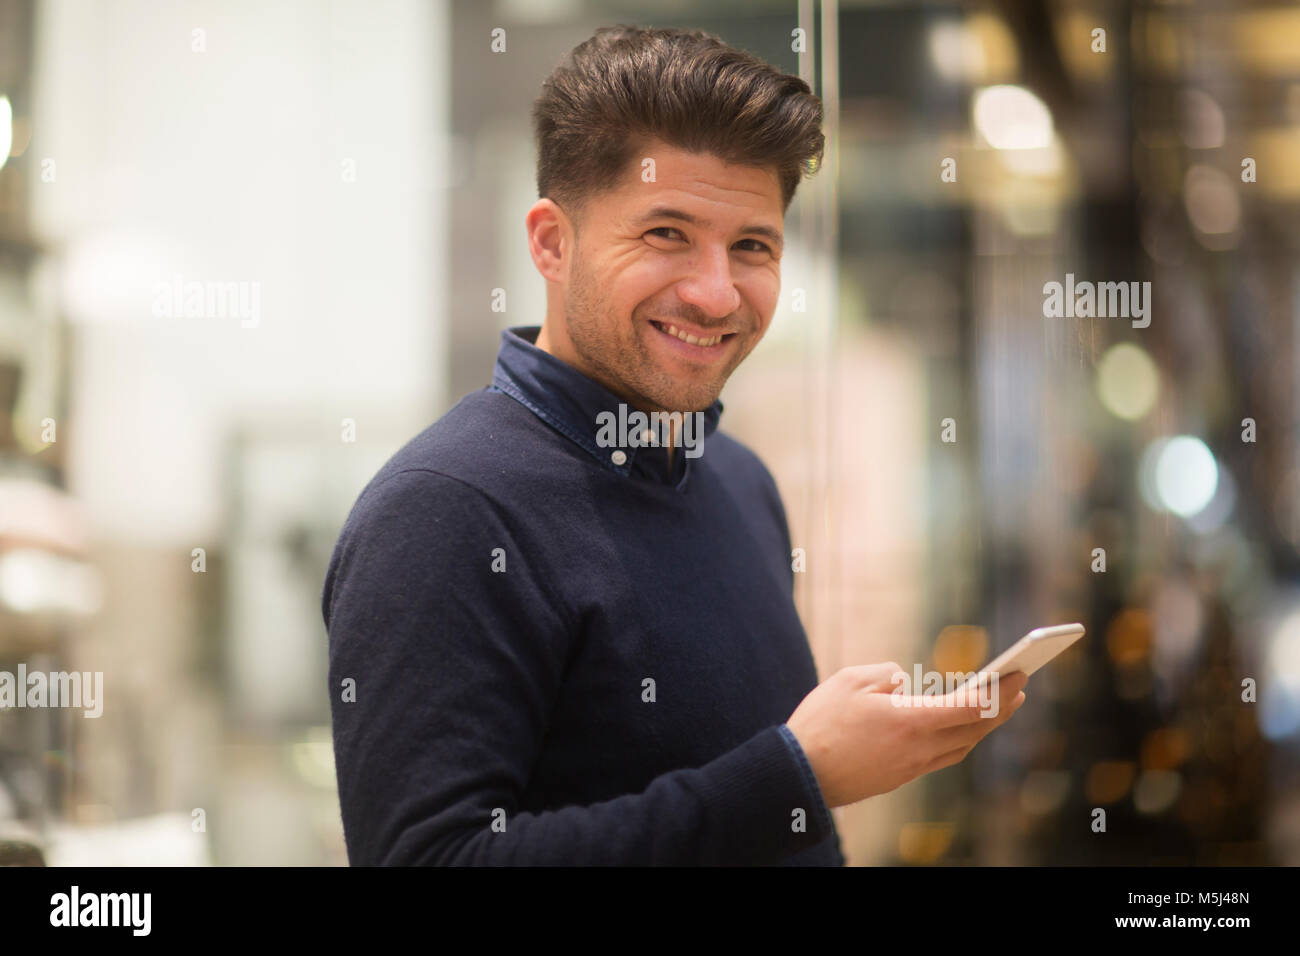 Portrait of laughing man with cell phone in a shopping mall Stock Photo